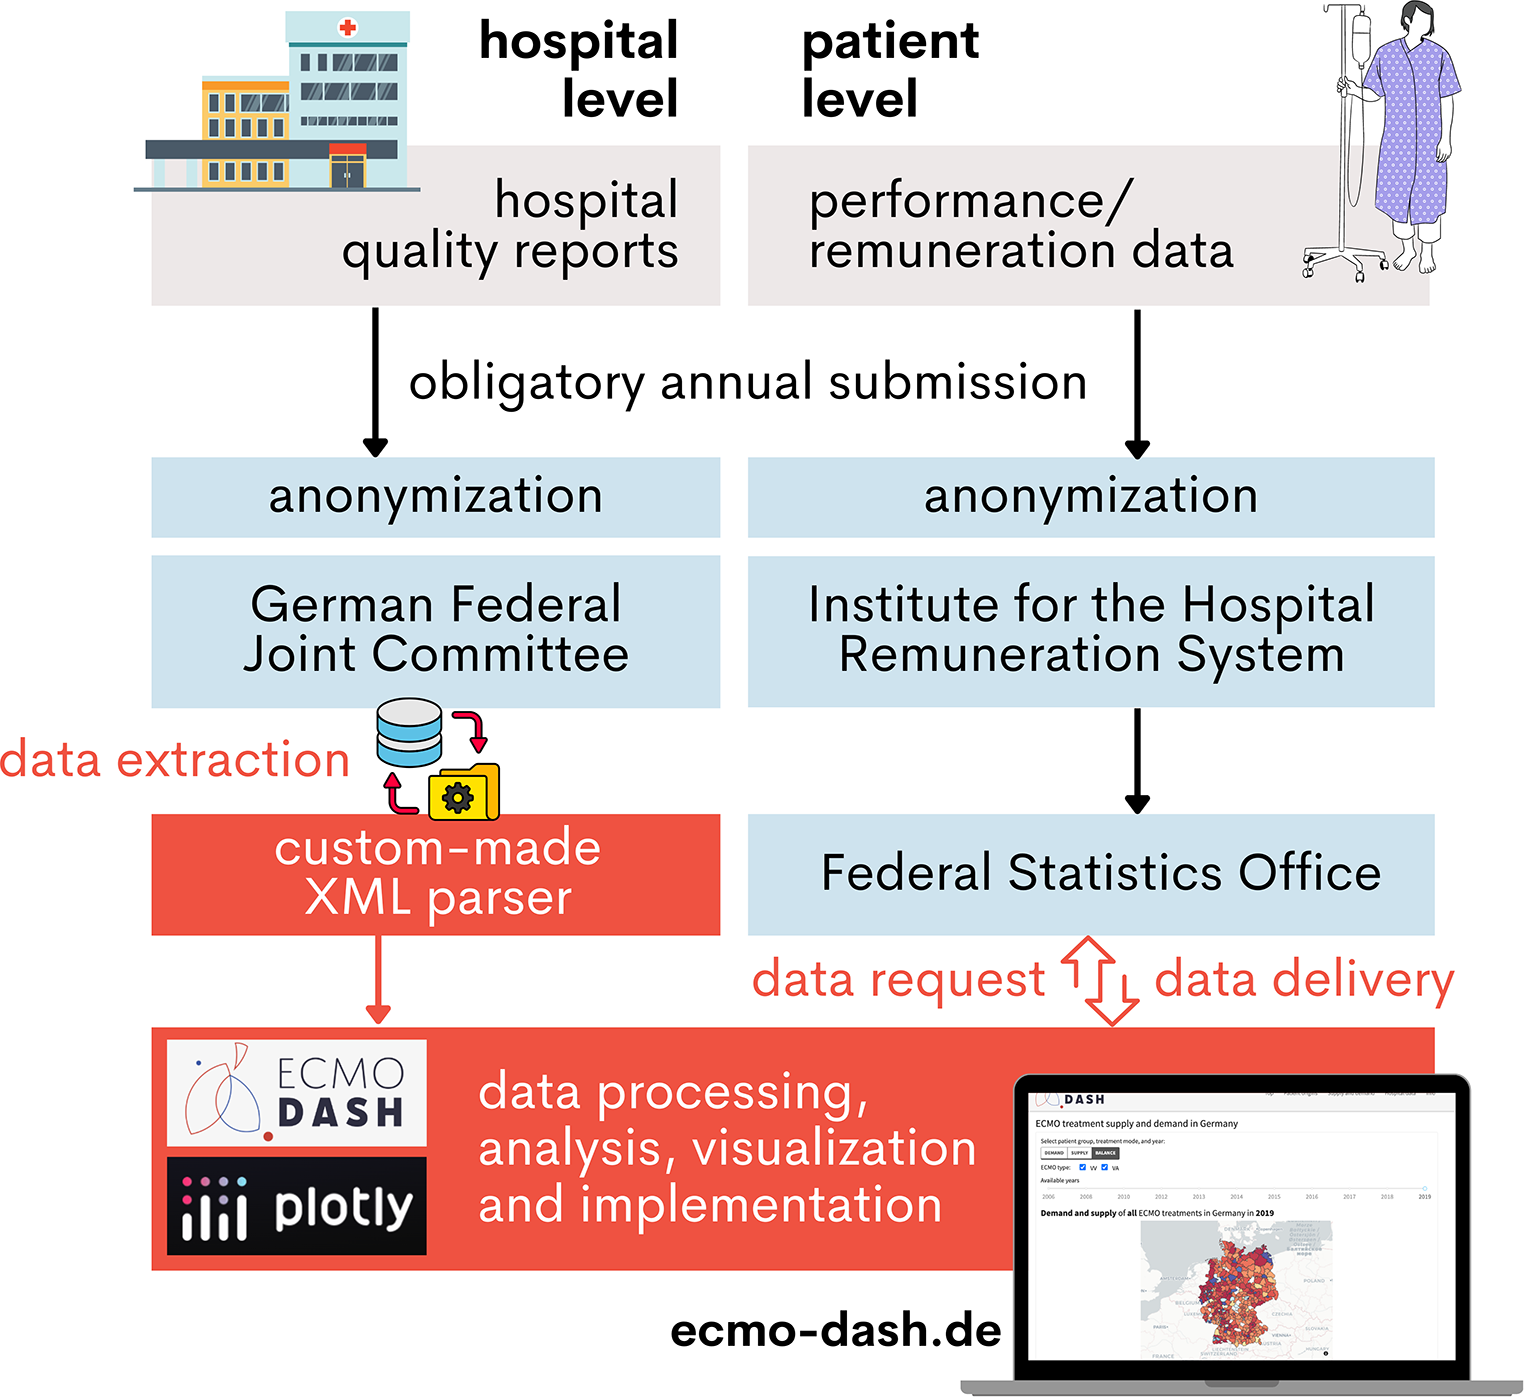 Web-based Dashboard on ECMO Utilization in Germany: An Interactive Visualization, Analyses, and Prediction Based on Real-life Data